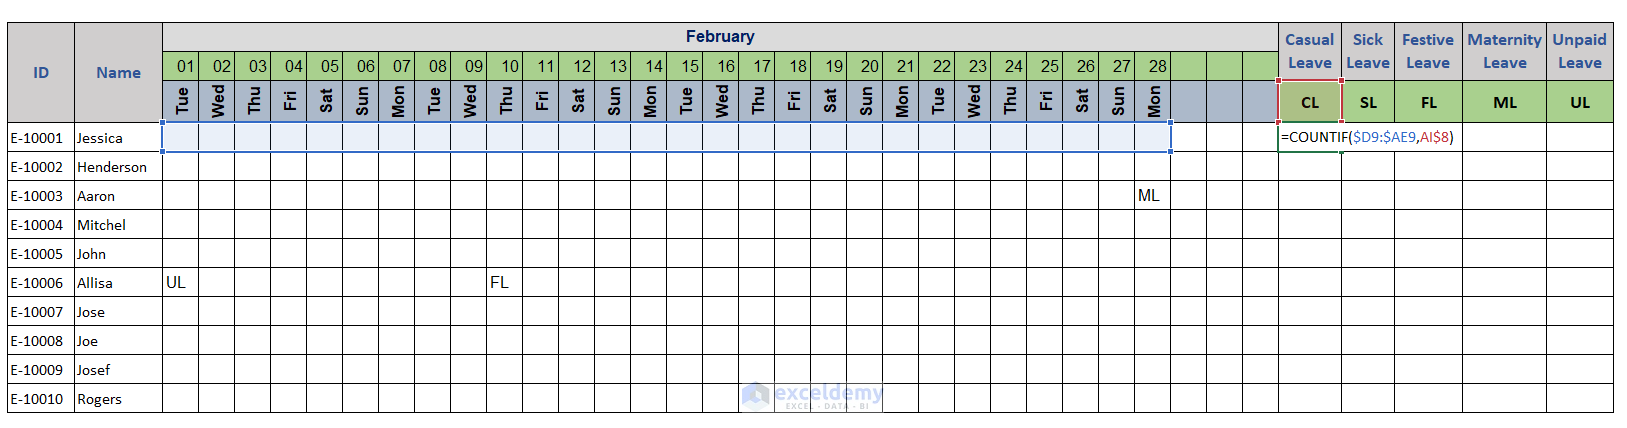 Calculate Monthly Leaves in Excel